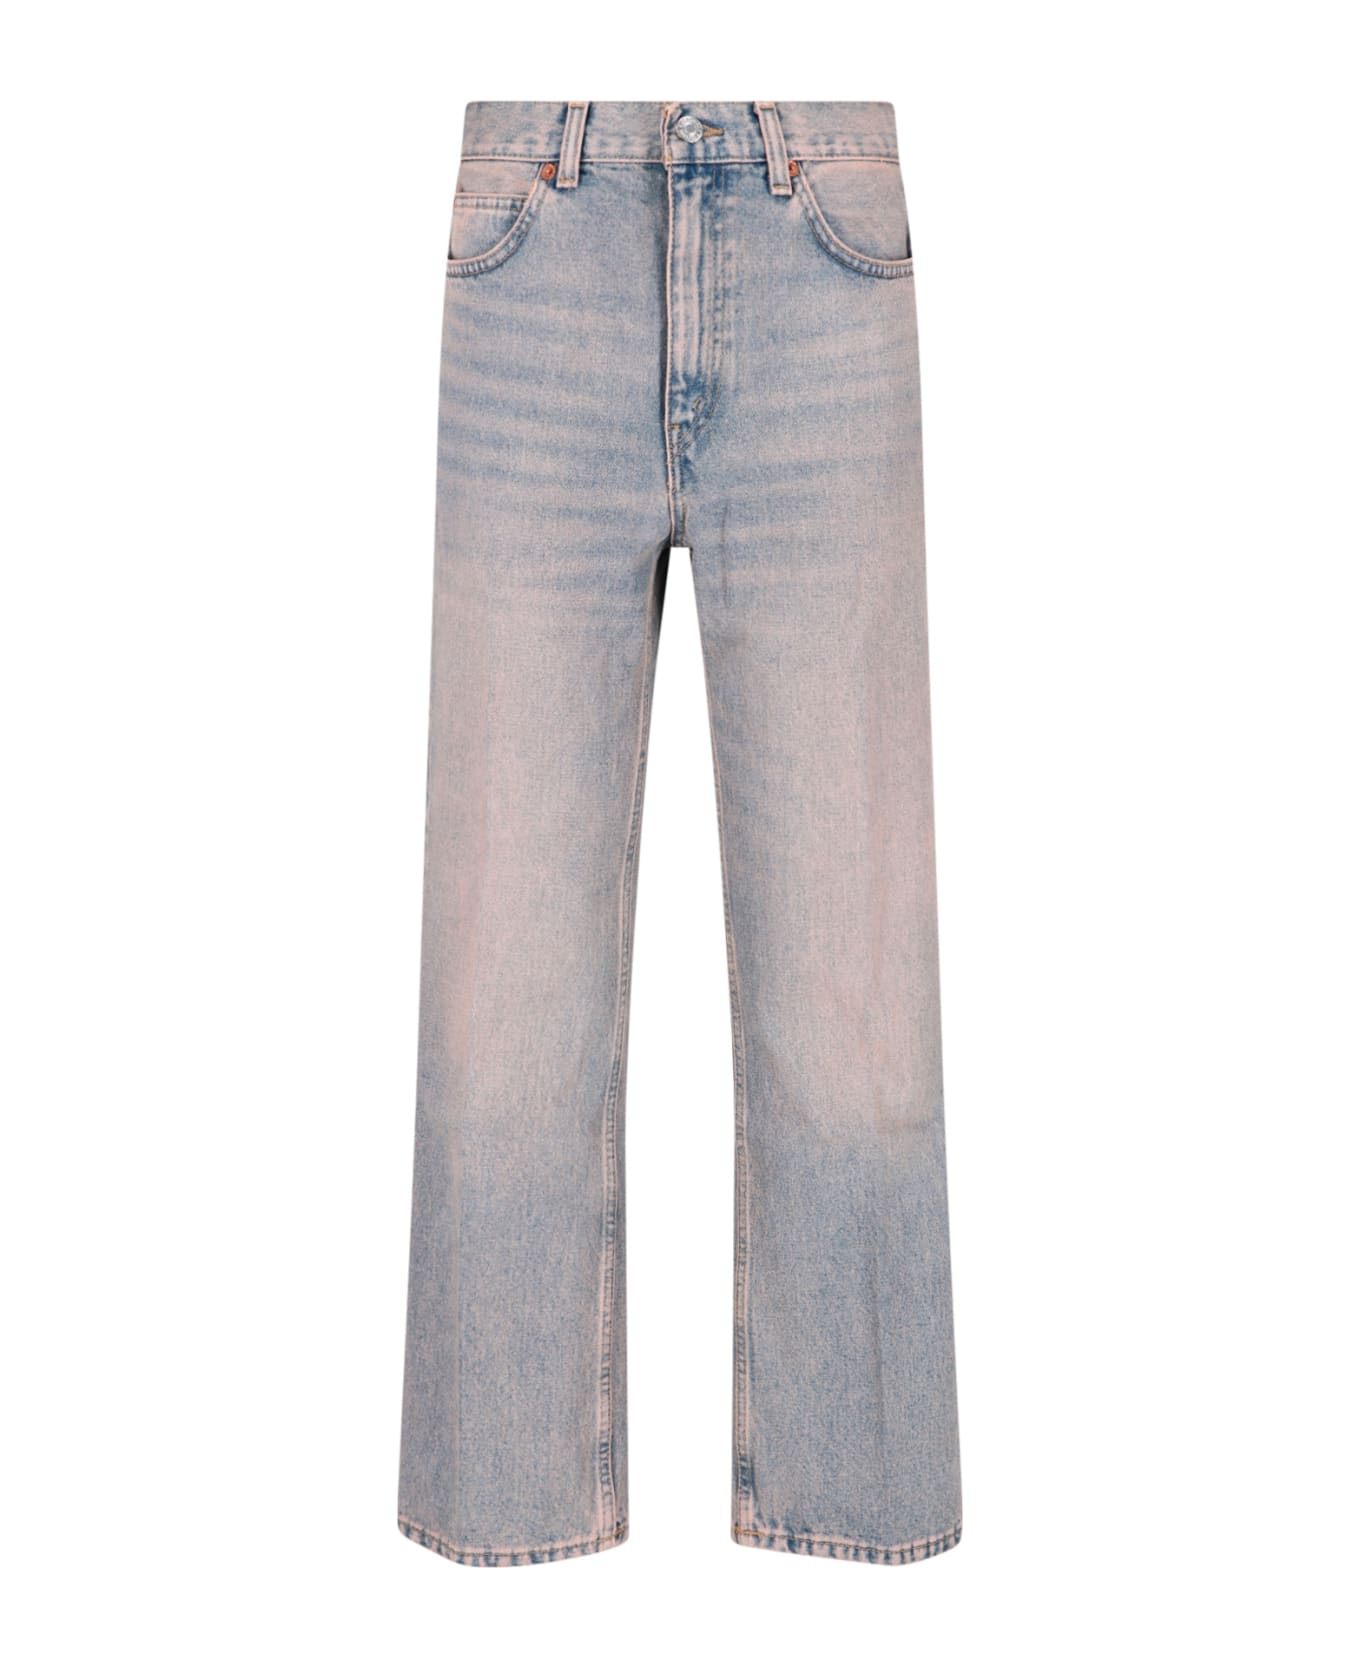 RE/DONE Jeans - Light blue